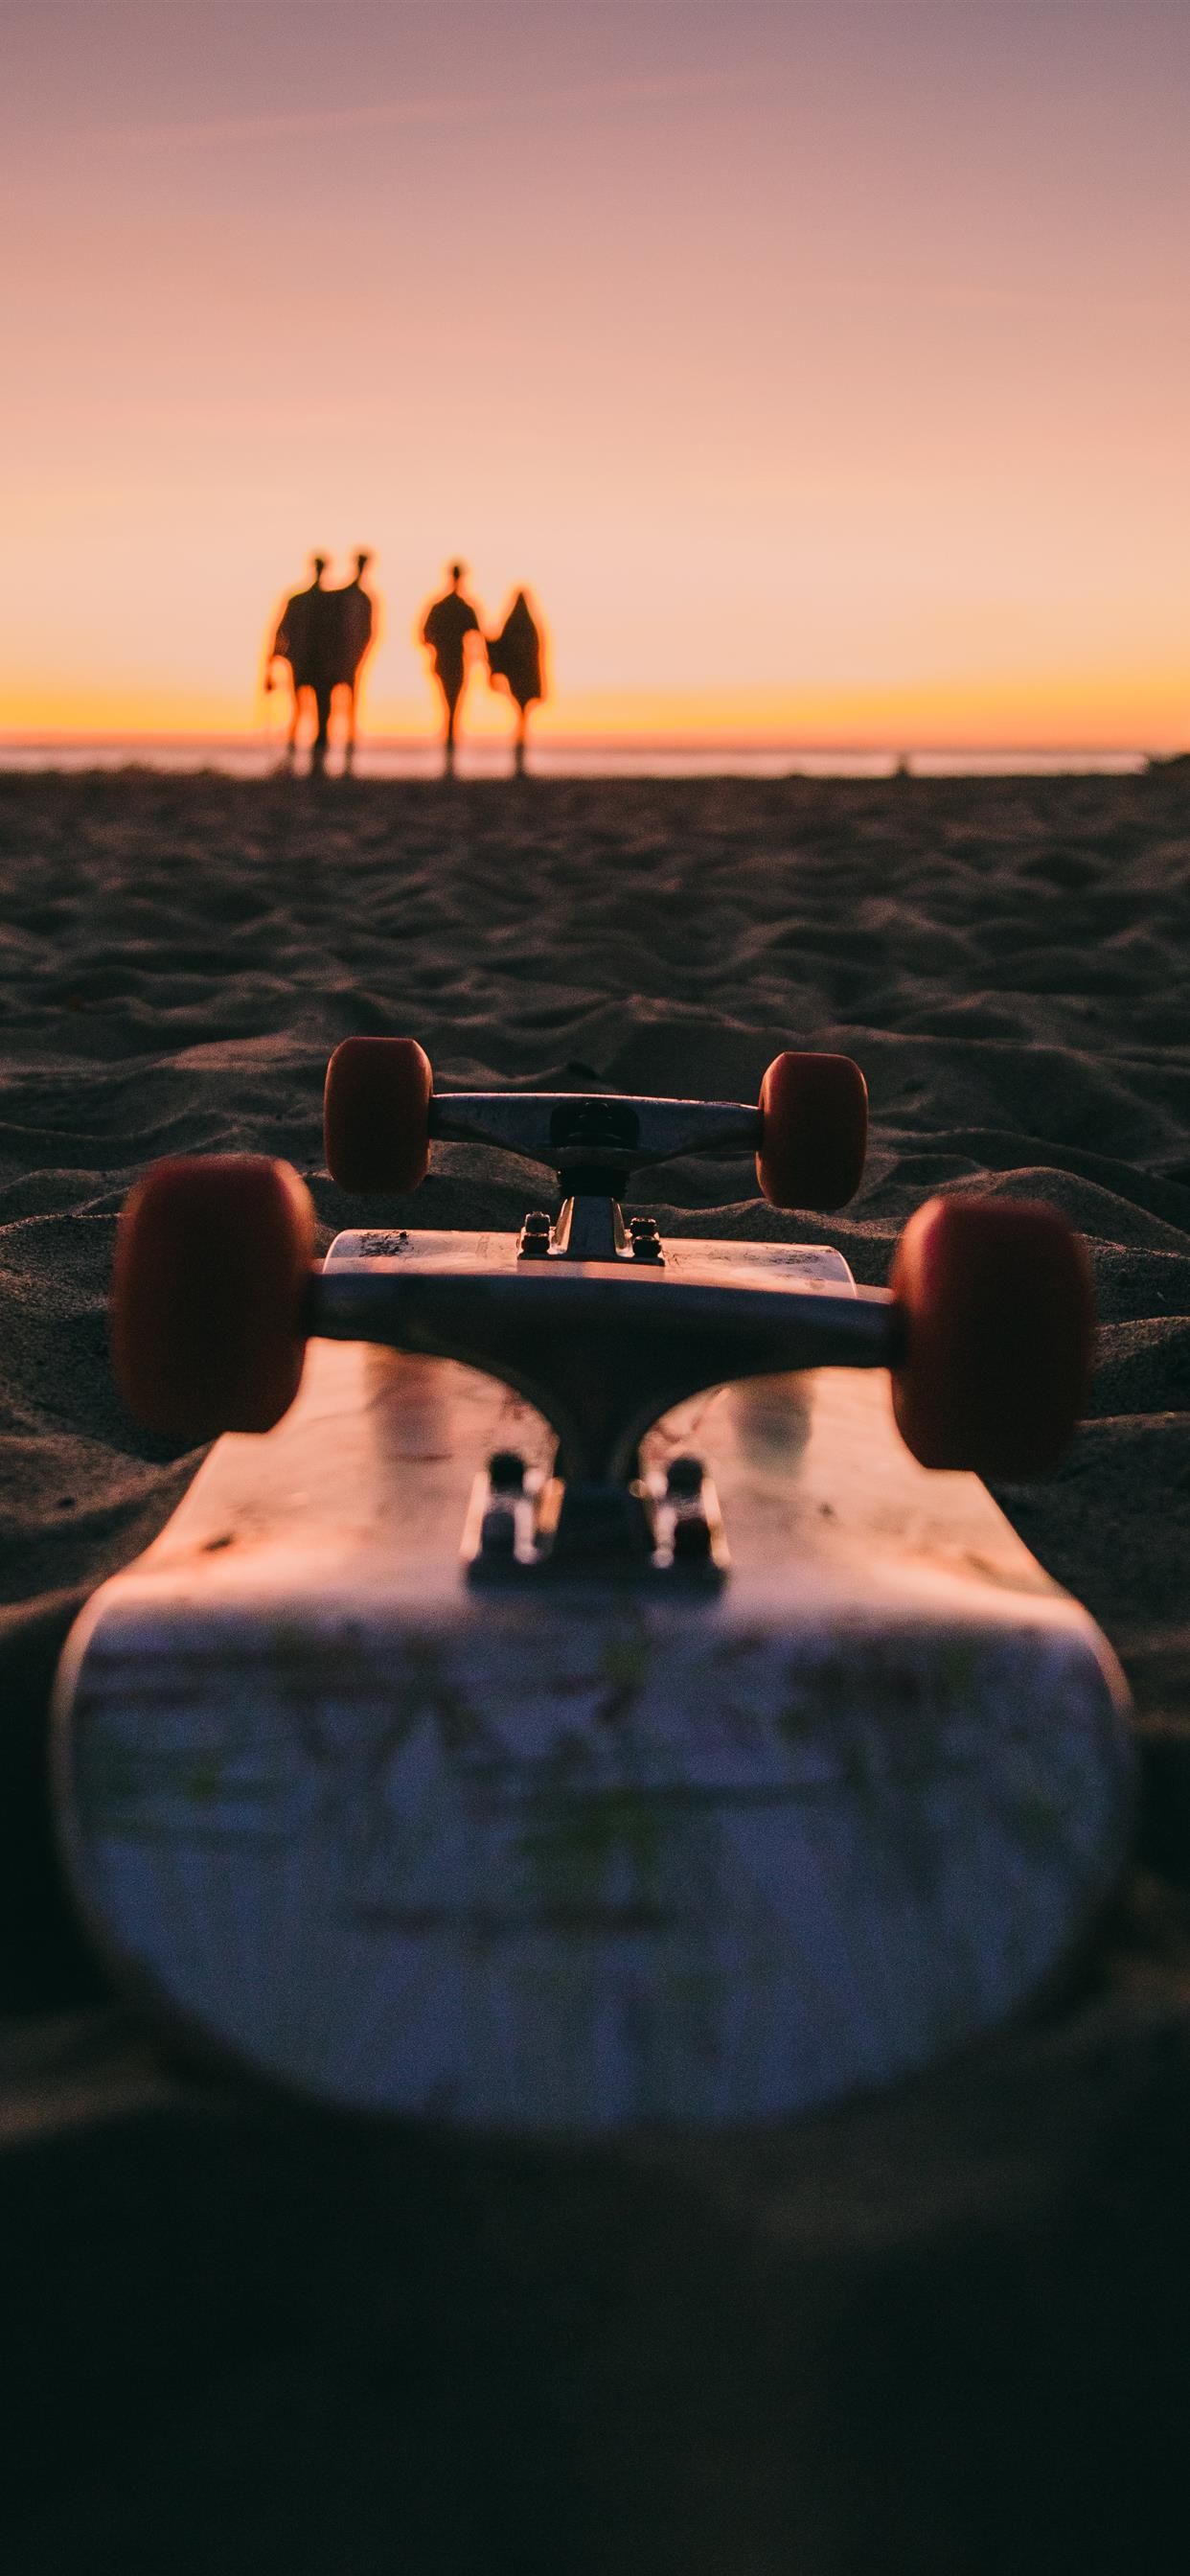 California Vibes at Venice Beach Los Angeles US iPhone X Wallpaper Free Download